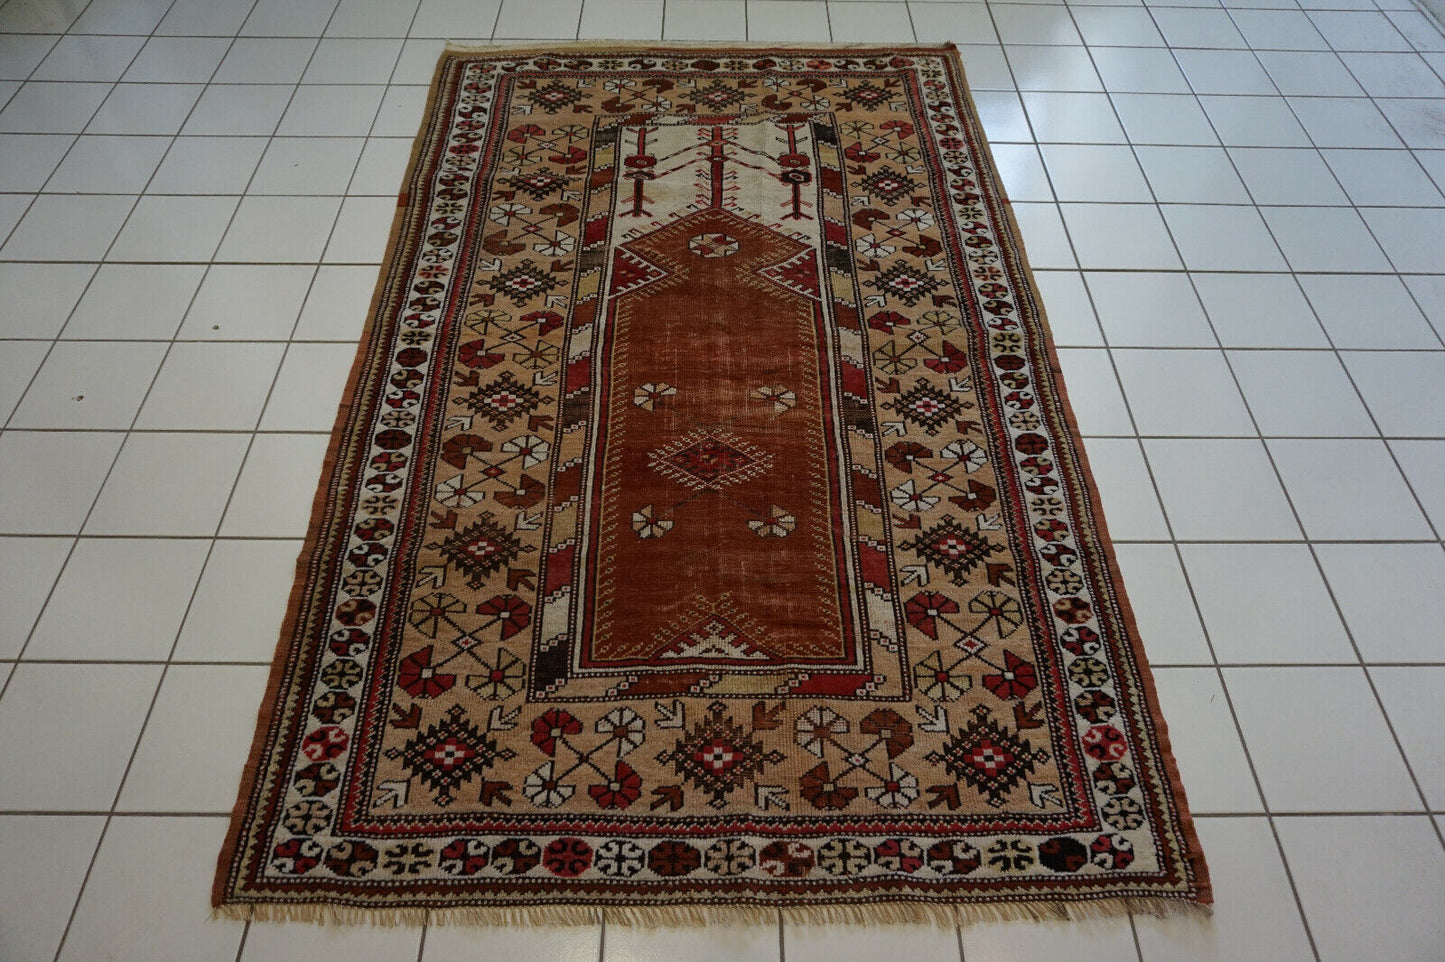 Side angle shot of the Handmade Traditional Turkish Melas Rug showcasing size and scale